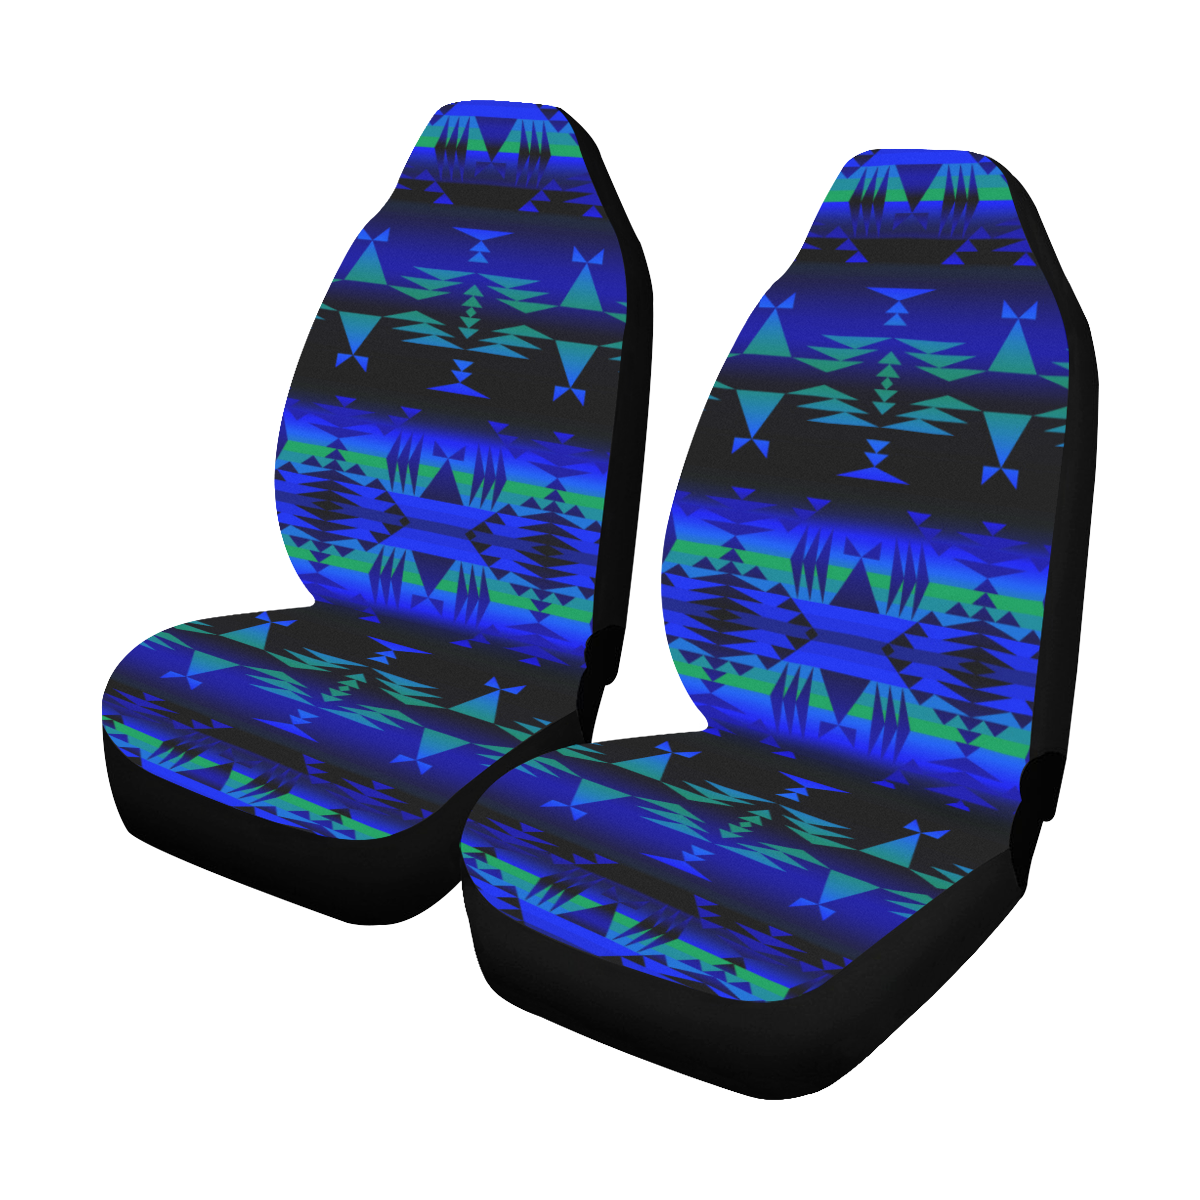 Between the Blue Ridge Mountains Seat Covers (Set of 2)